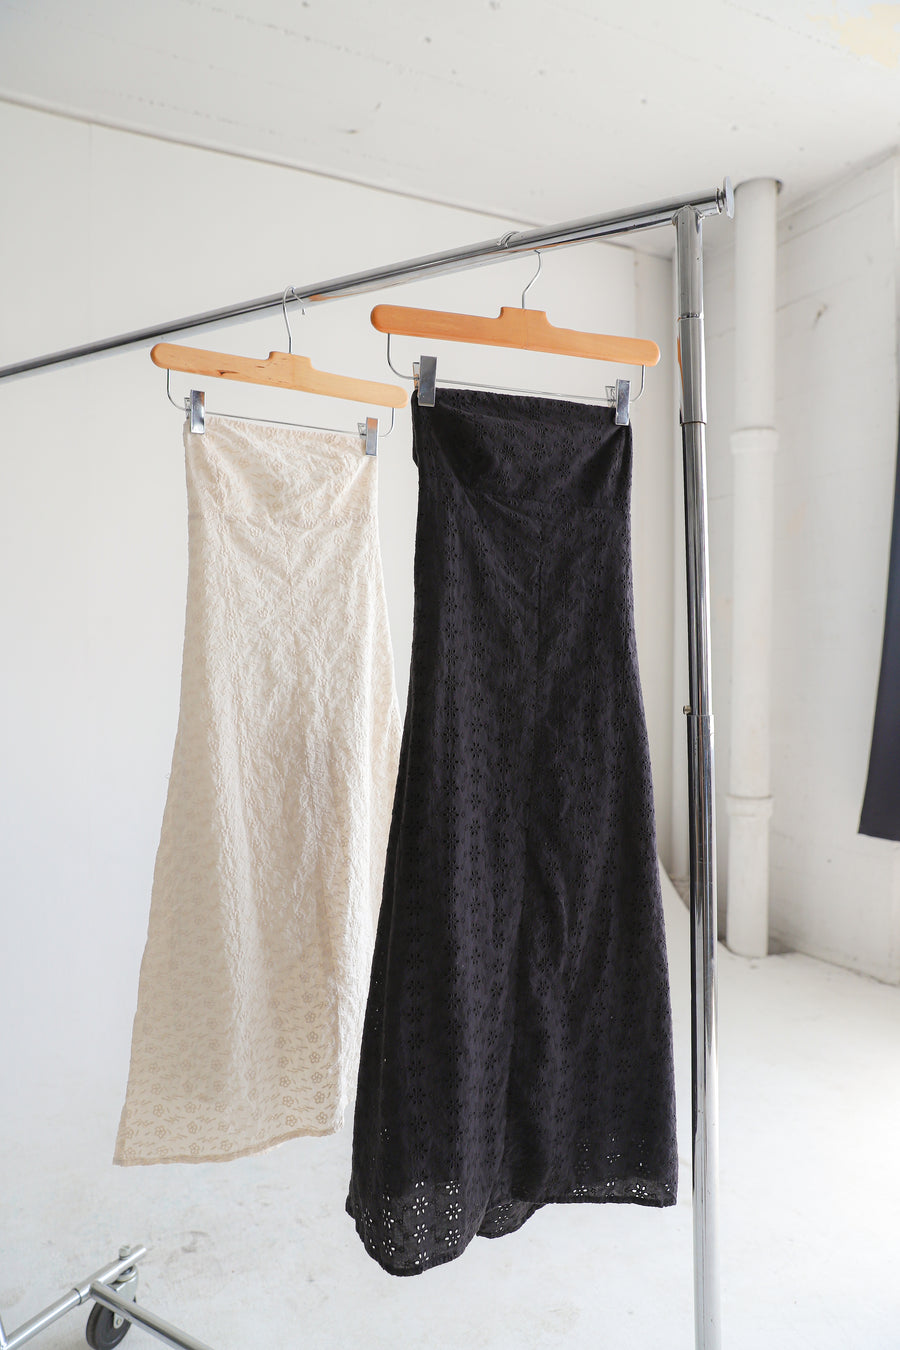 Two dresses hanging on a clothing rack.